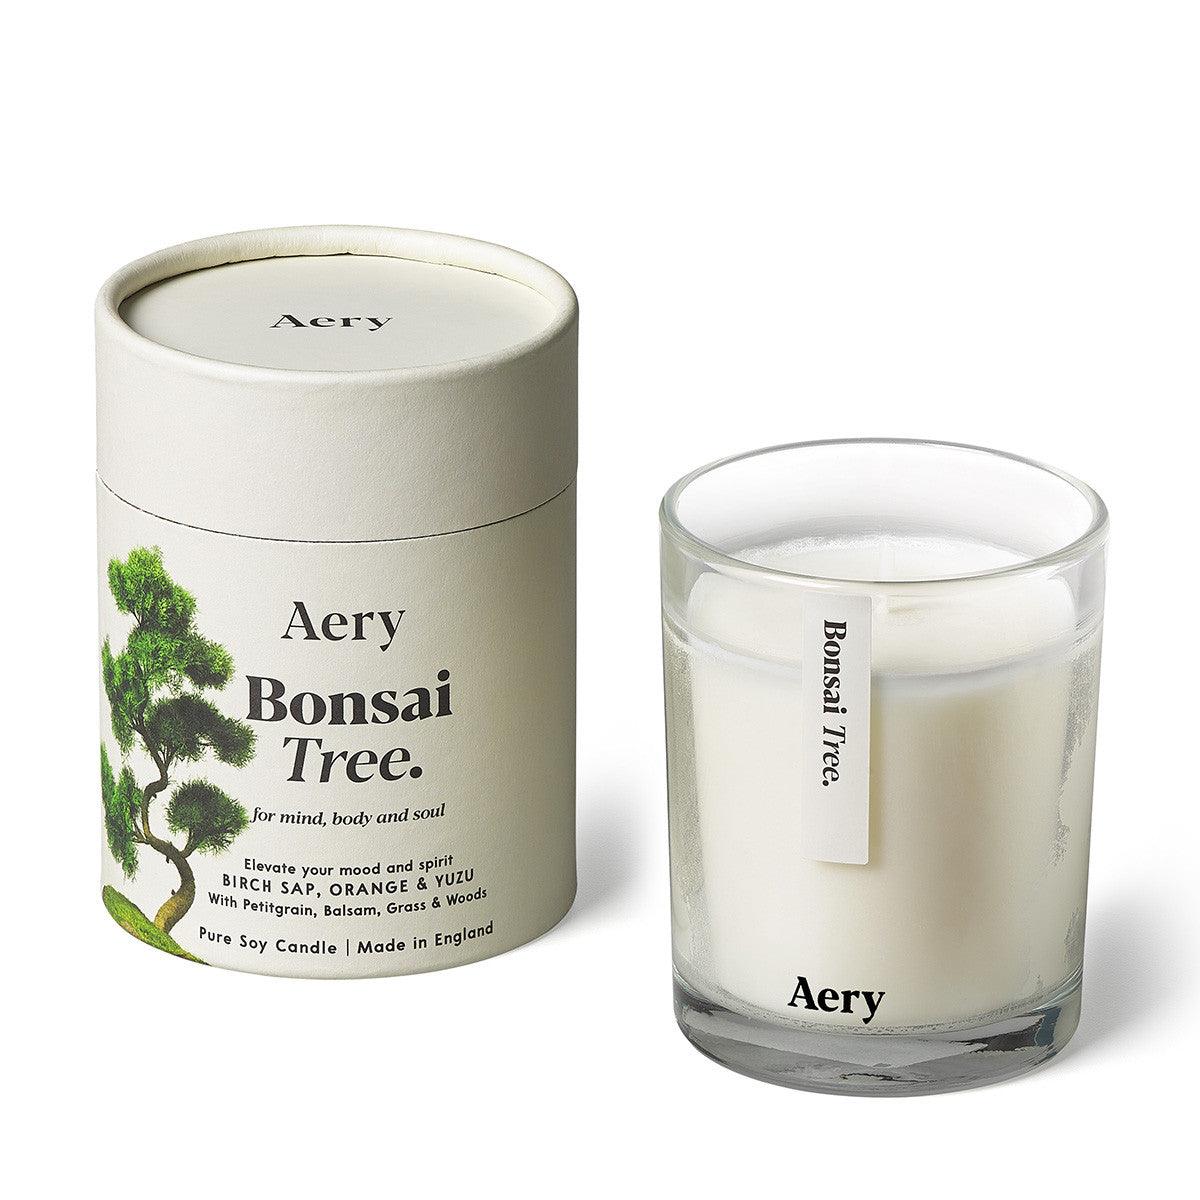 Aery Living Botanical 200g Soy Candle - Bonsai Tree | Scented Candles | Candle Fragrances | Soy Candles | Newcastle Candles | Best Candles | Nice Candles | Gifts | Best Gifts | Wax Candles | Mothers Day Gifts | Christmas Gifts | Candles Australia | Candle Shop | Presents | Sydney Candles | Brisbane Candles | Townsville Candles | Melbourne Candles | Perth Candles | Soy Wax | Accepts Bitcoin | Candles Online | Accepts Crypto currency | Upcycle Studio